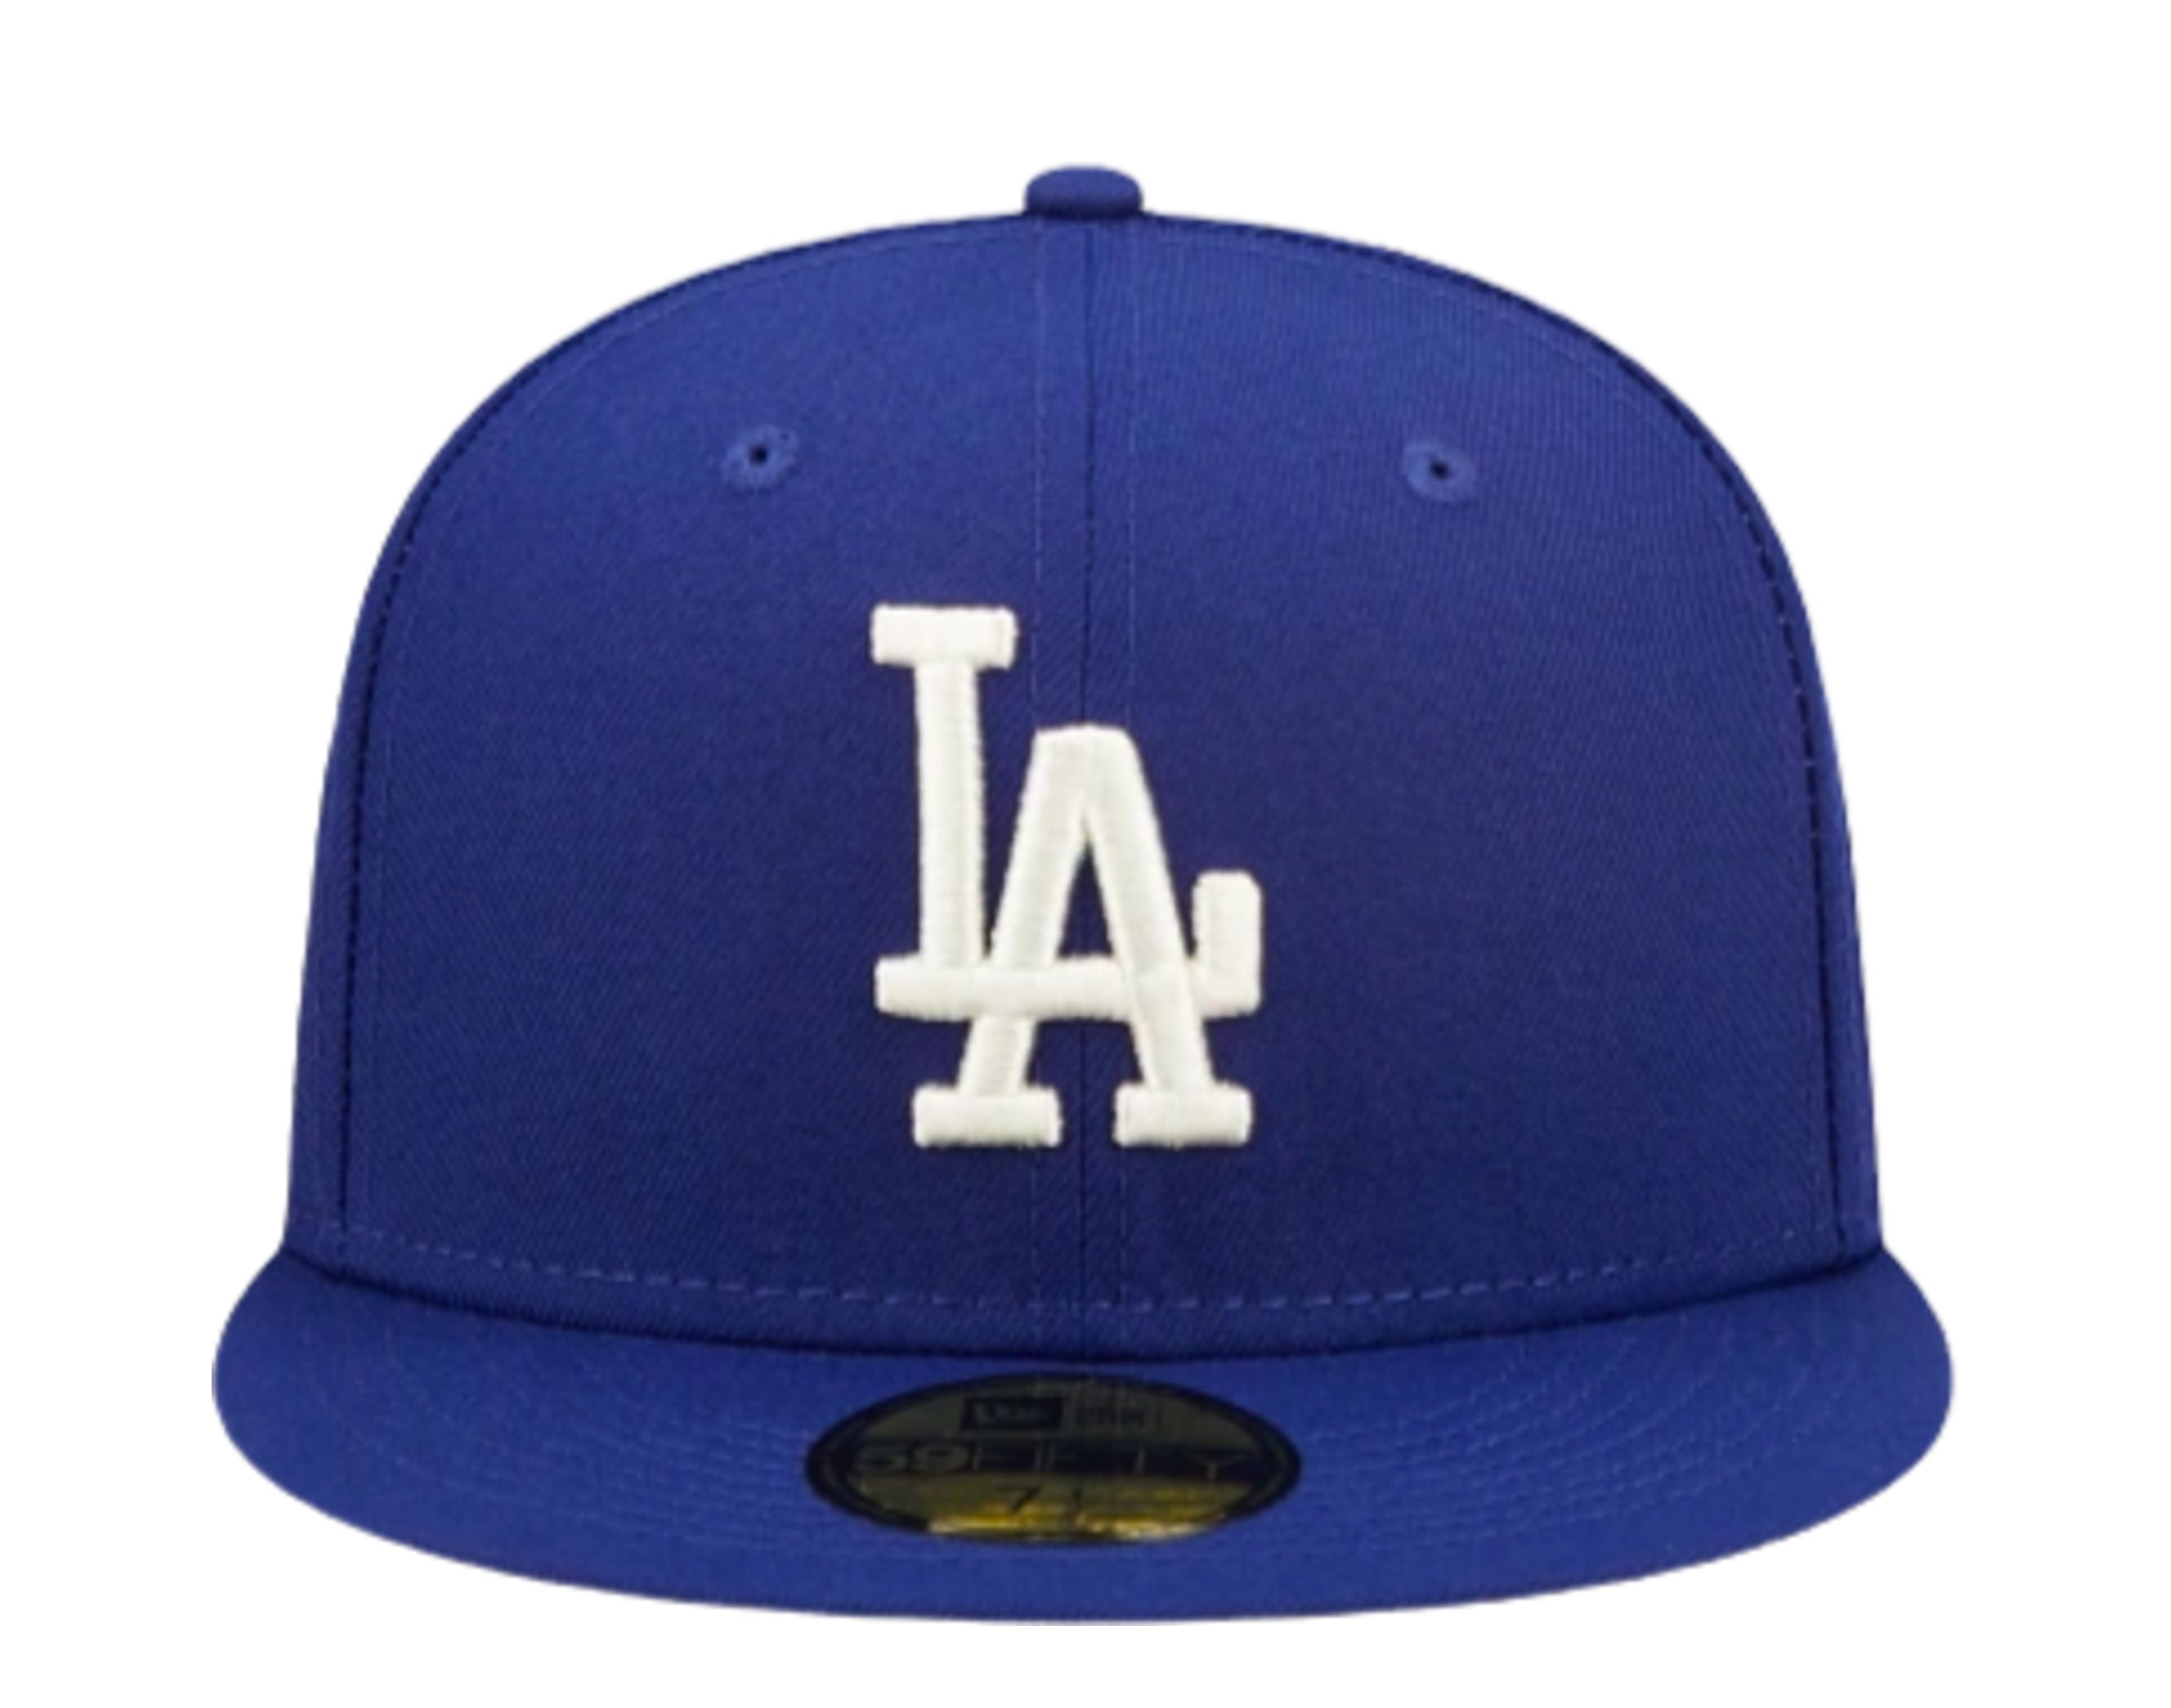 New Era 60358110 Jersey Essential 9FORTY Los Angeles Dodgers Cap Blue Man